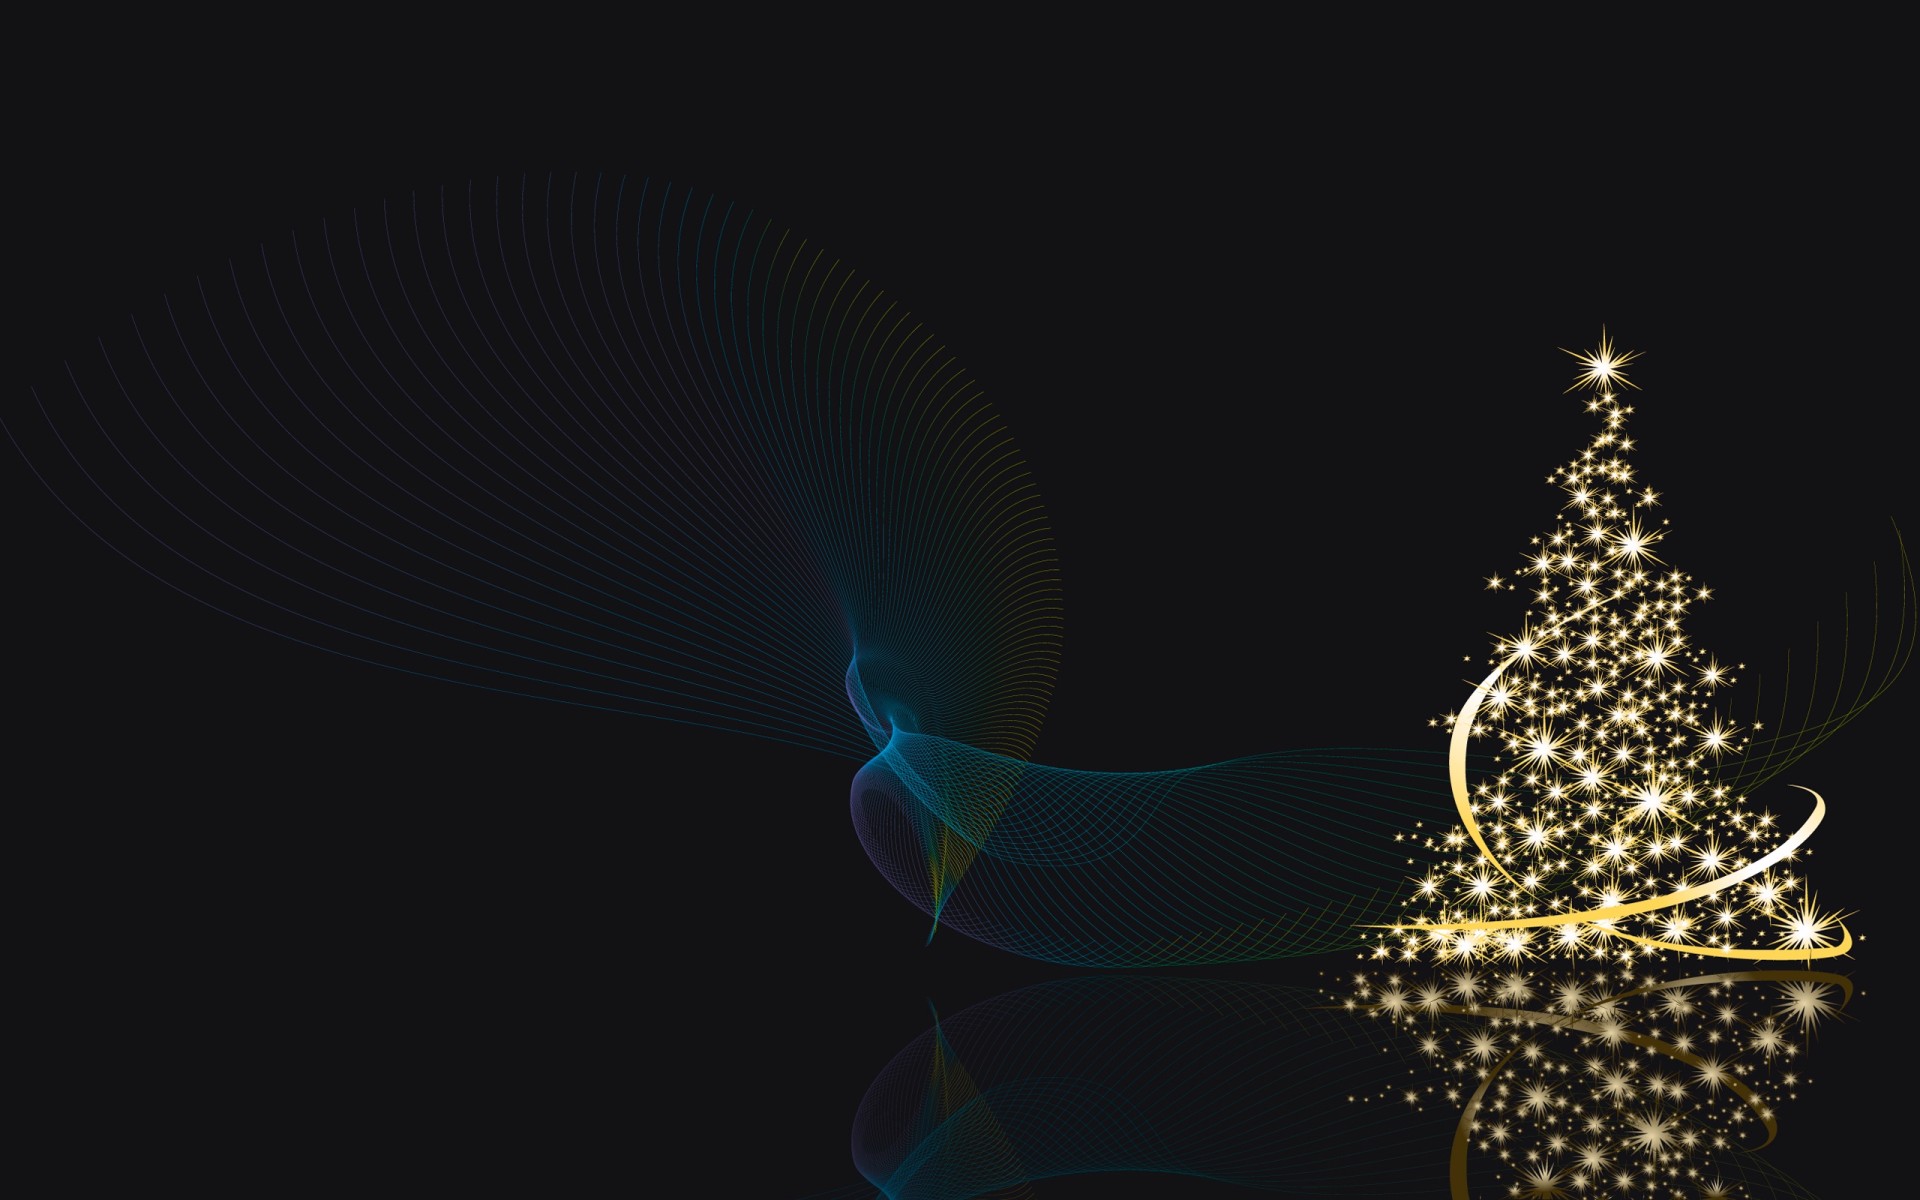 Previous, Holidays - New Year wallpapers - Christmas Tree wallpaper